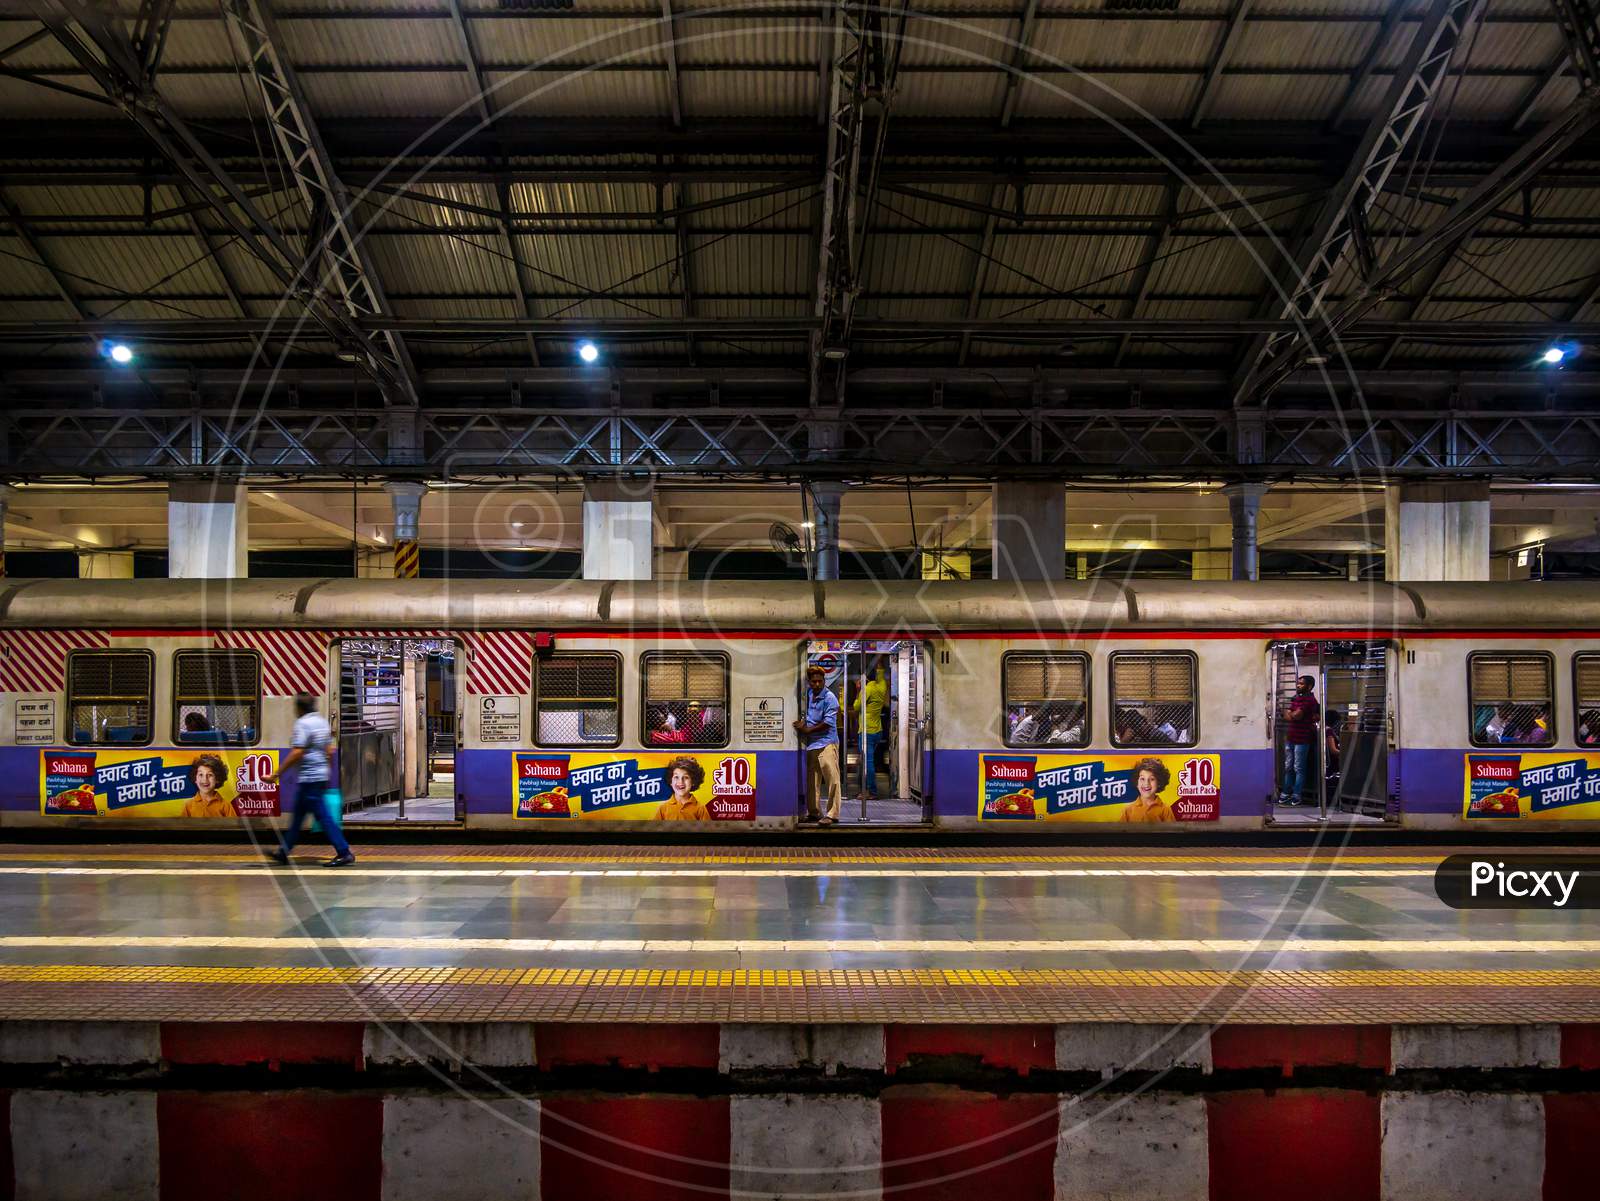 Deserted Platform And Local Trains During Lockdown In Mumbai Due To Corona Pandemic